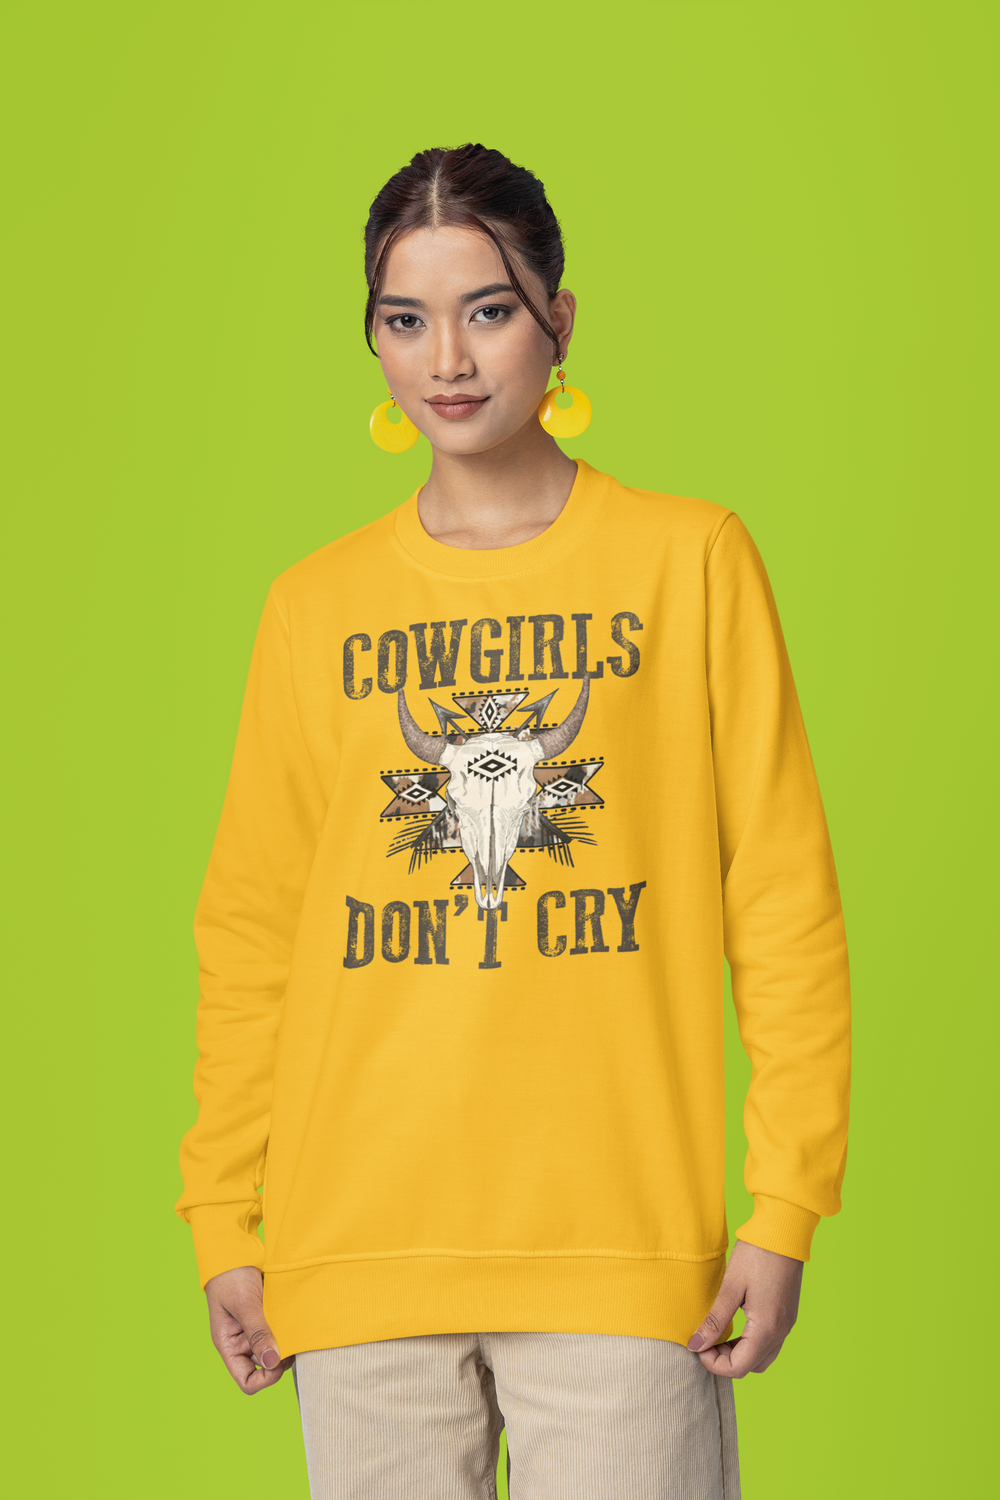 The Wild Ones: Cowgirls Don't Cry - DTF Transfer - Direct-to-Film